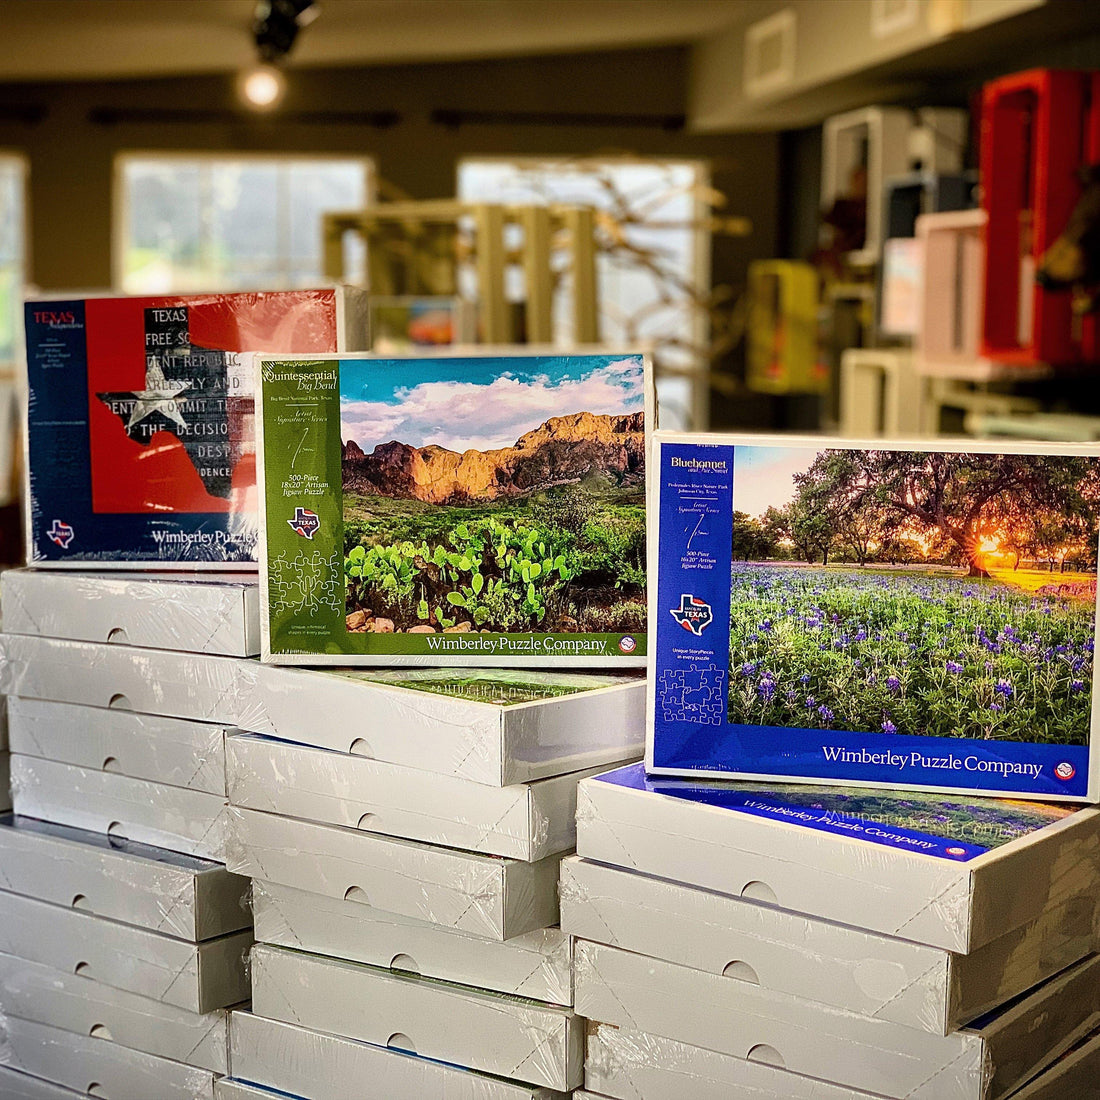 Texas Capitol Gift Shop, Bullock Texas State History Museum - Austin Puzzles - Wimberley Puzzle Company